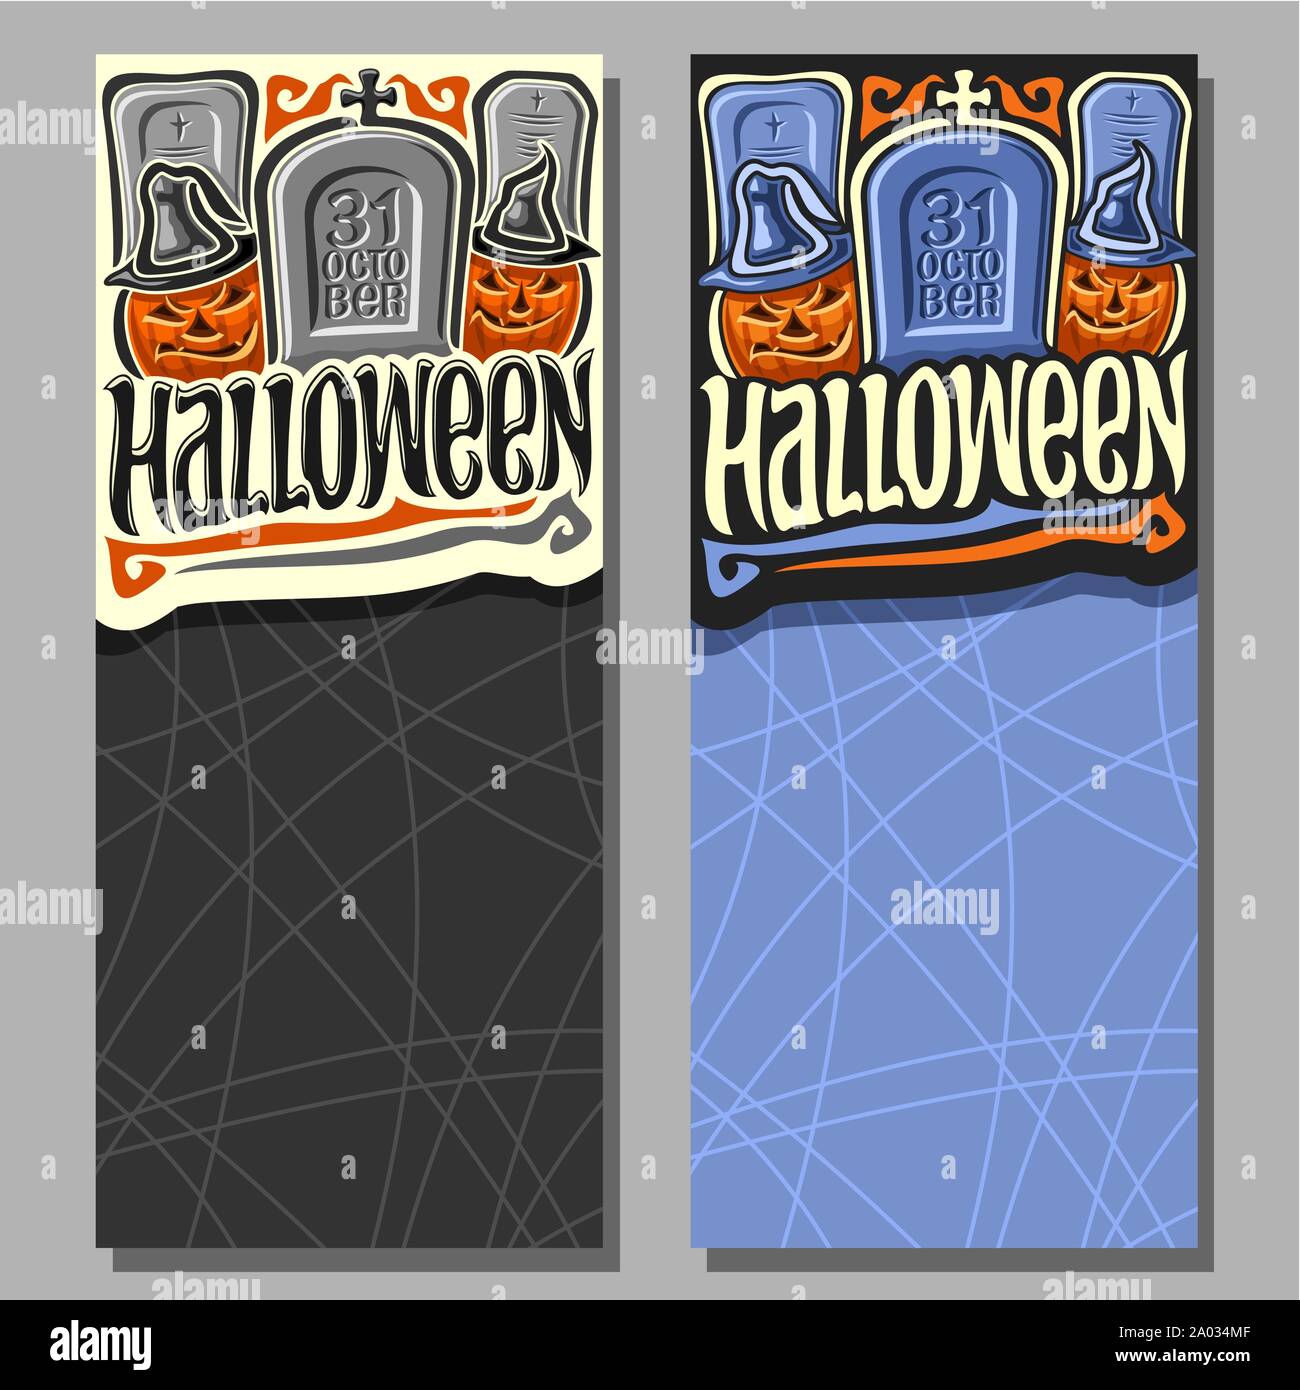 Vector vertical banners for Halloween holiday: on cemetery blue tombstone with inscription 31 oktober, 2 scary character pumpkins, layout with title - Stock Vector